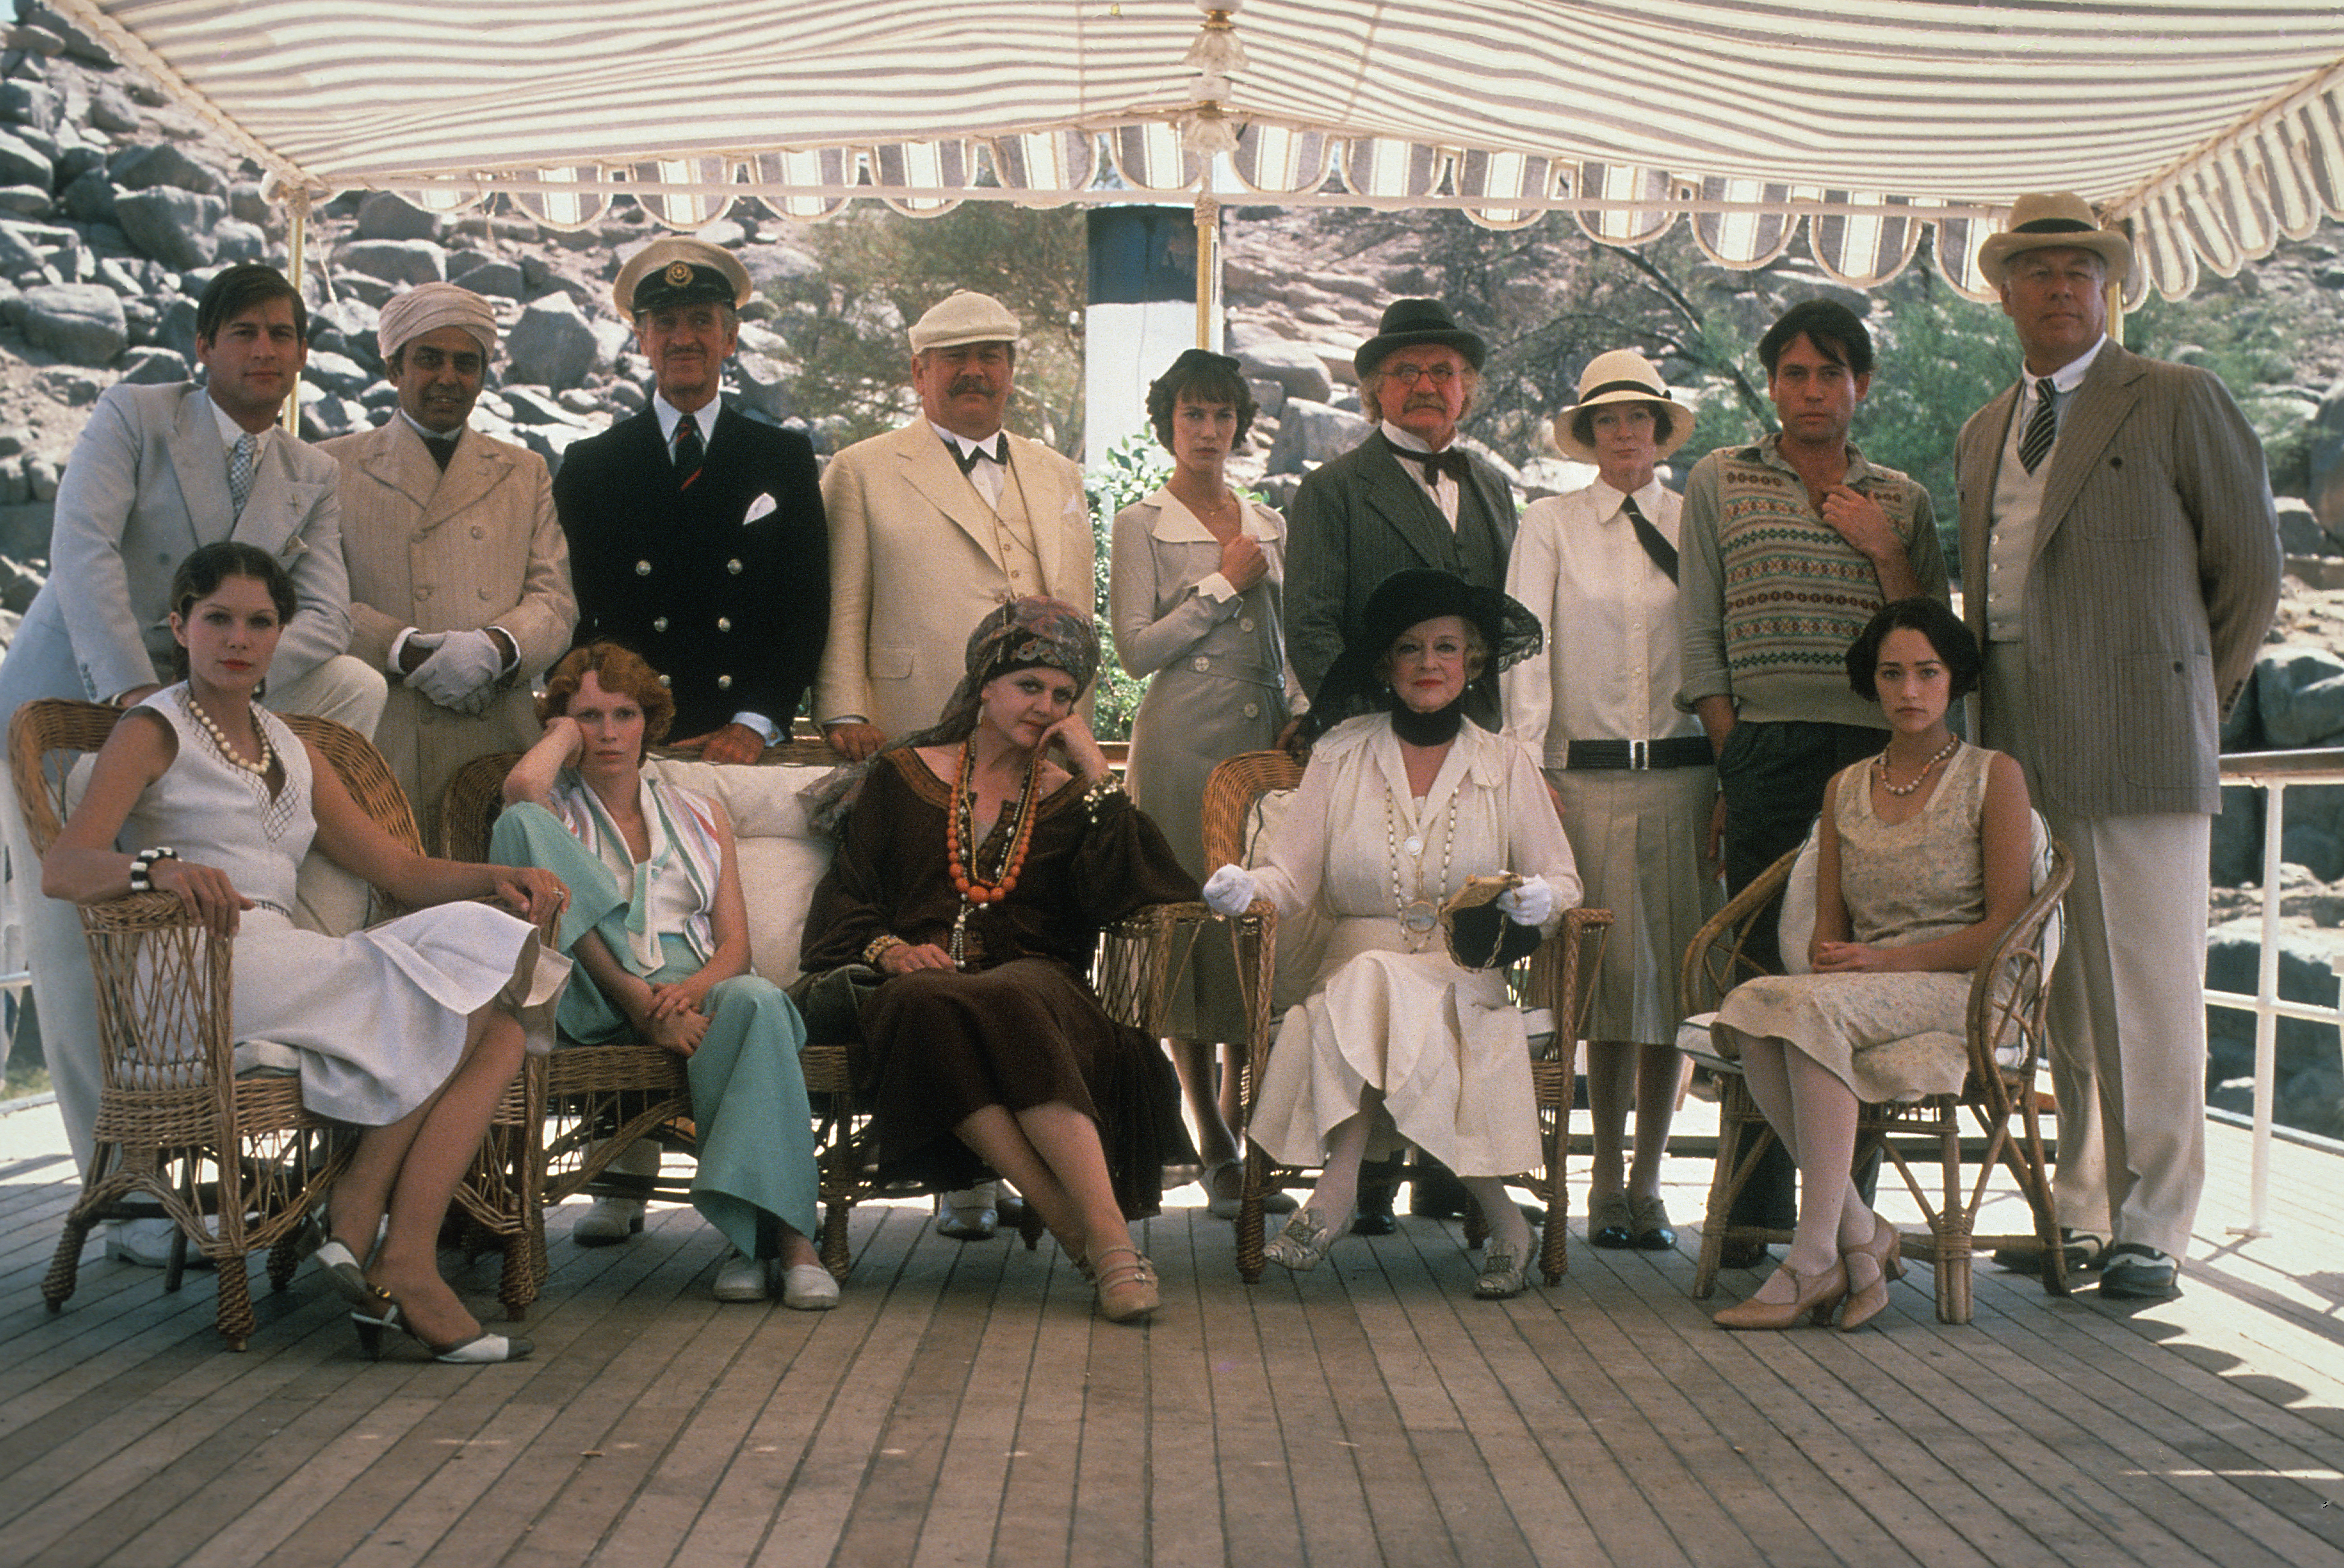 Still of Bette Davis, David Niven, Mia Farrow, Olivia Hussey, George Kennedy, Angela Lansbury, Peter Ustinov and Jack Warden in Death on the Nile (1978)